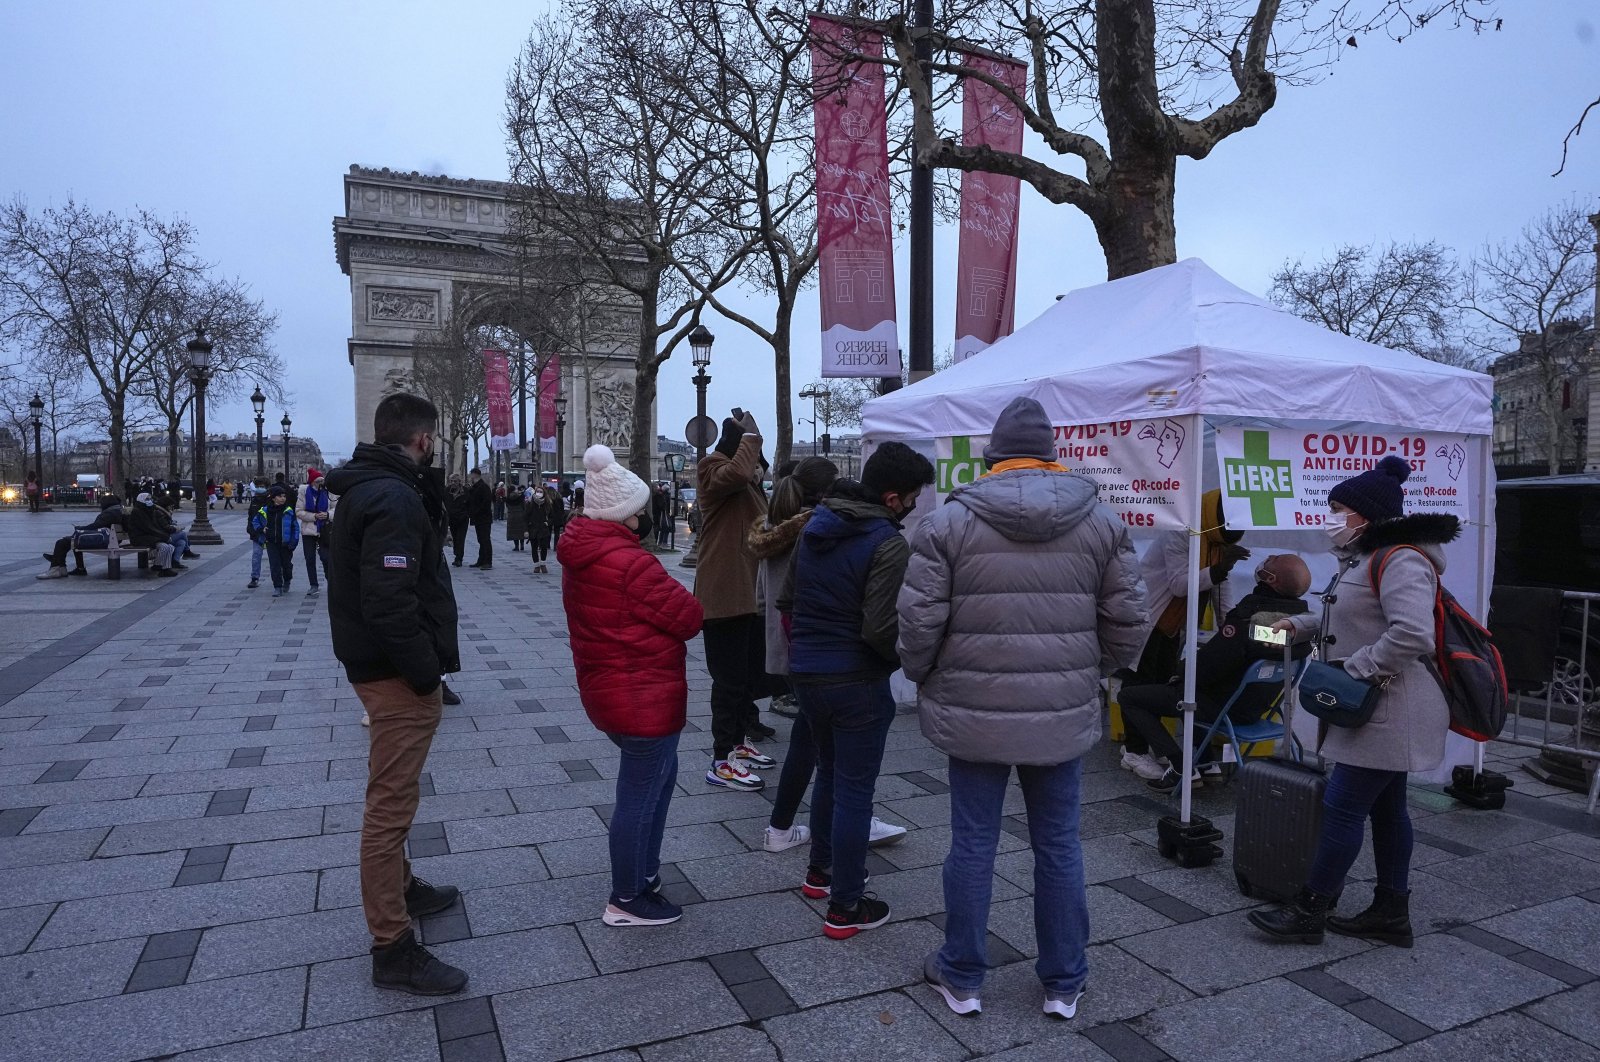 People line up to get a nasal swap at a mobile COVID-19 testing site on Christmas Eve at the Champs Elysees avenue in Paris, Dec. 24, 2021. (AP Photo)